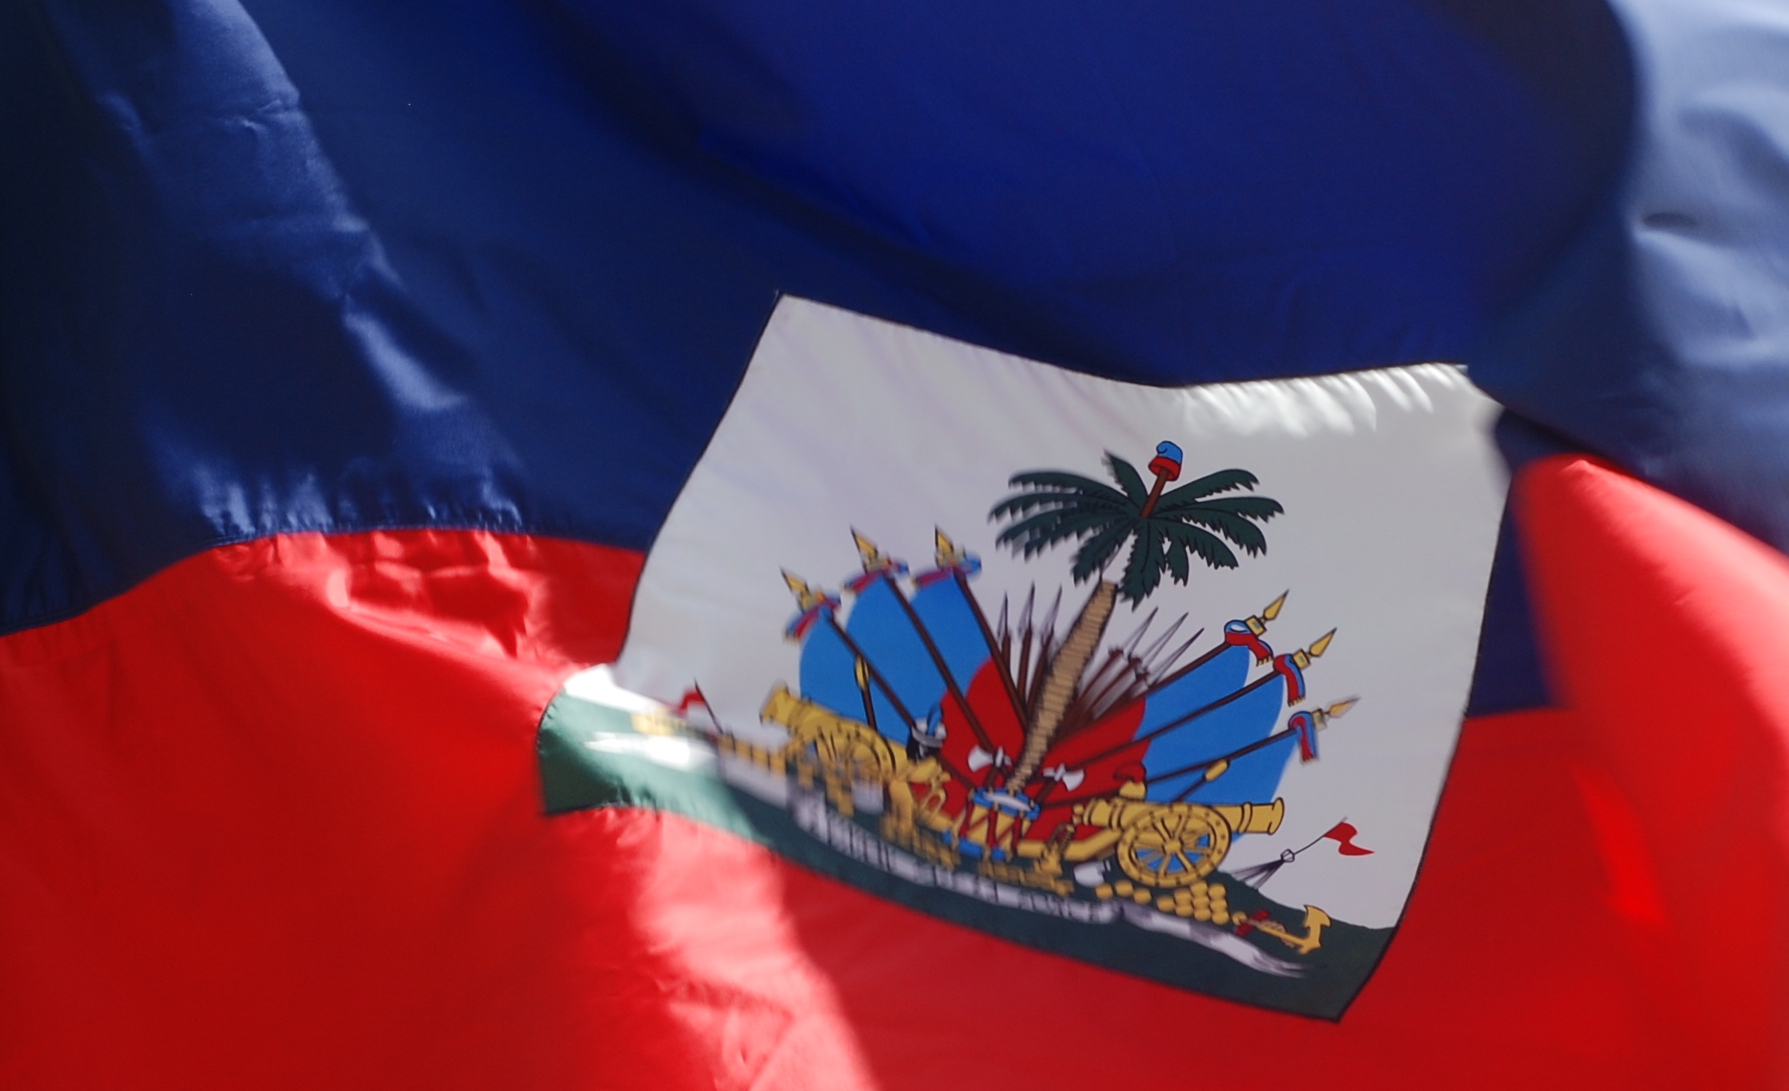 Read more about the article ‘Citizens are not protected’: What does 2022 hold for Haiti?